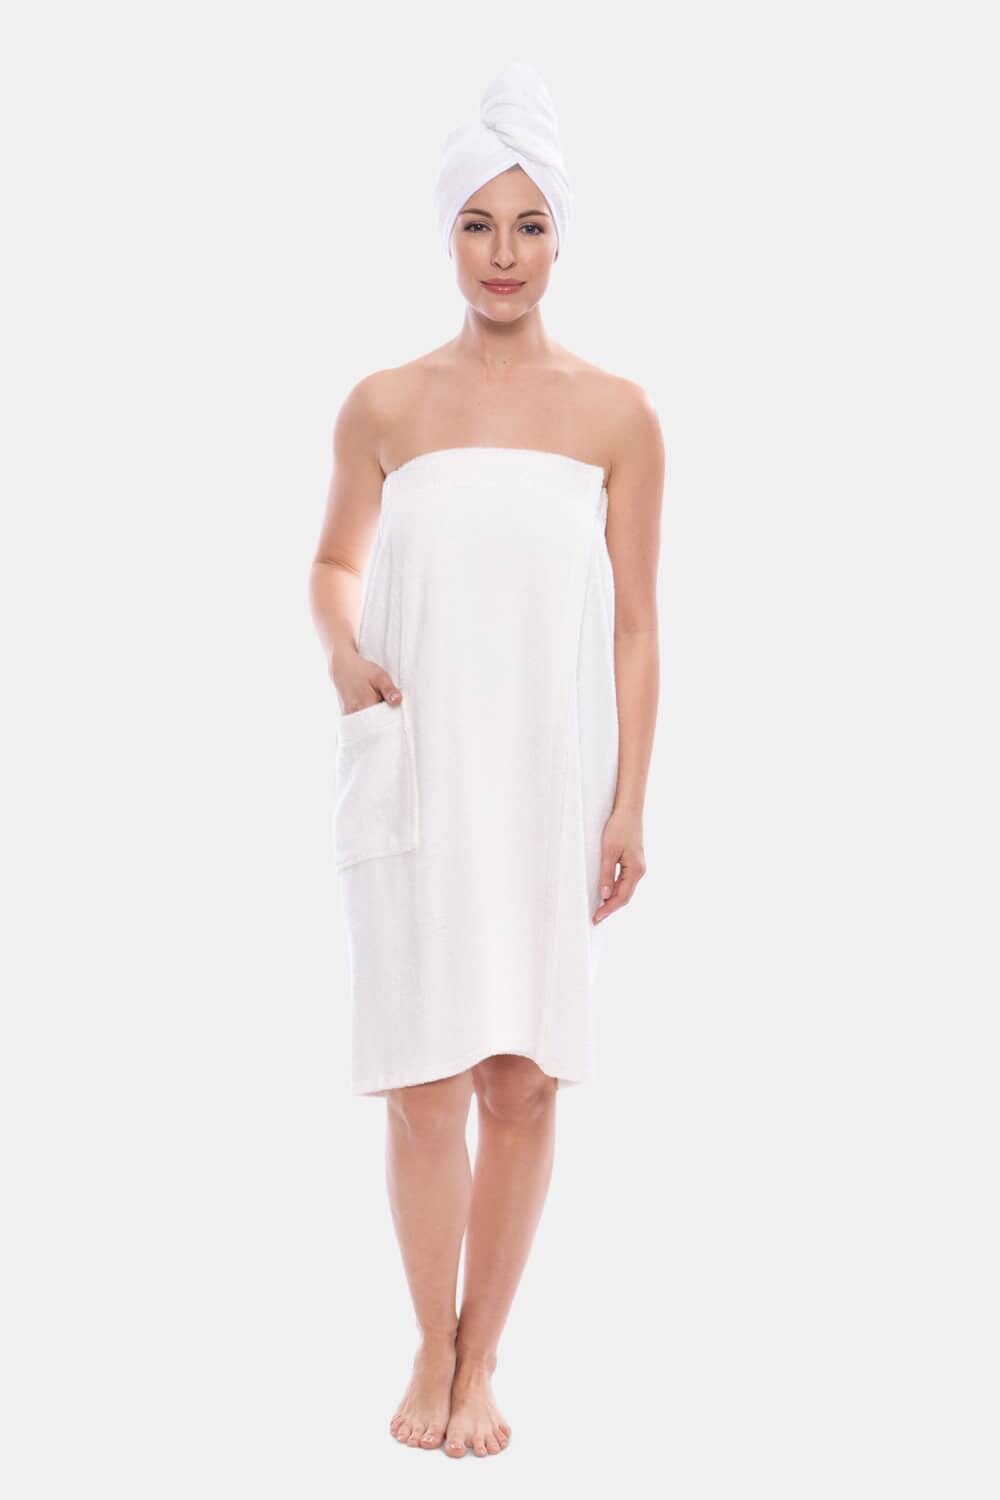 Texere Women's 2pc Terry Cloth Body and Hair Wrap Womens>Spa>Set Fishers Finery White S/M 